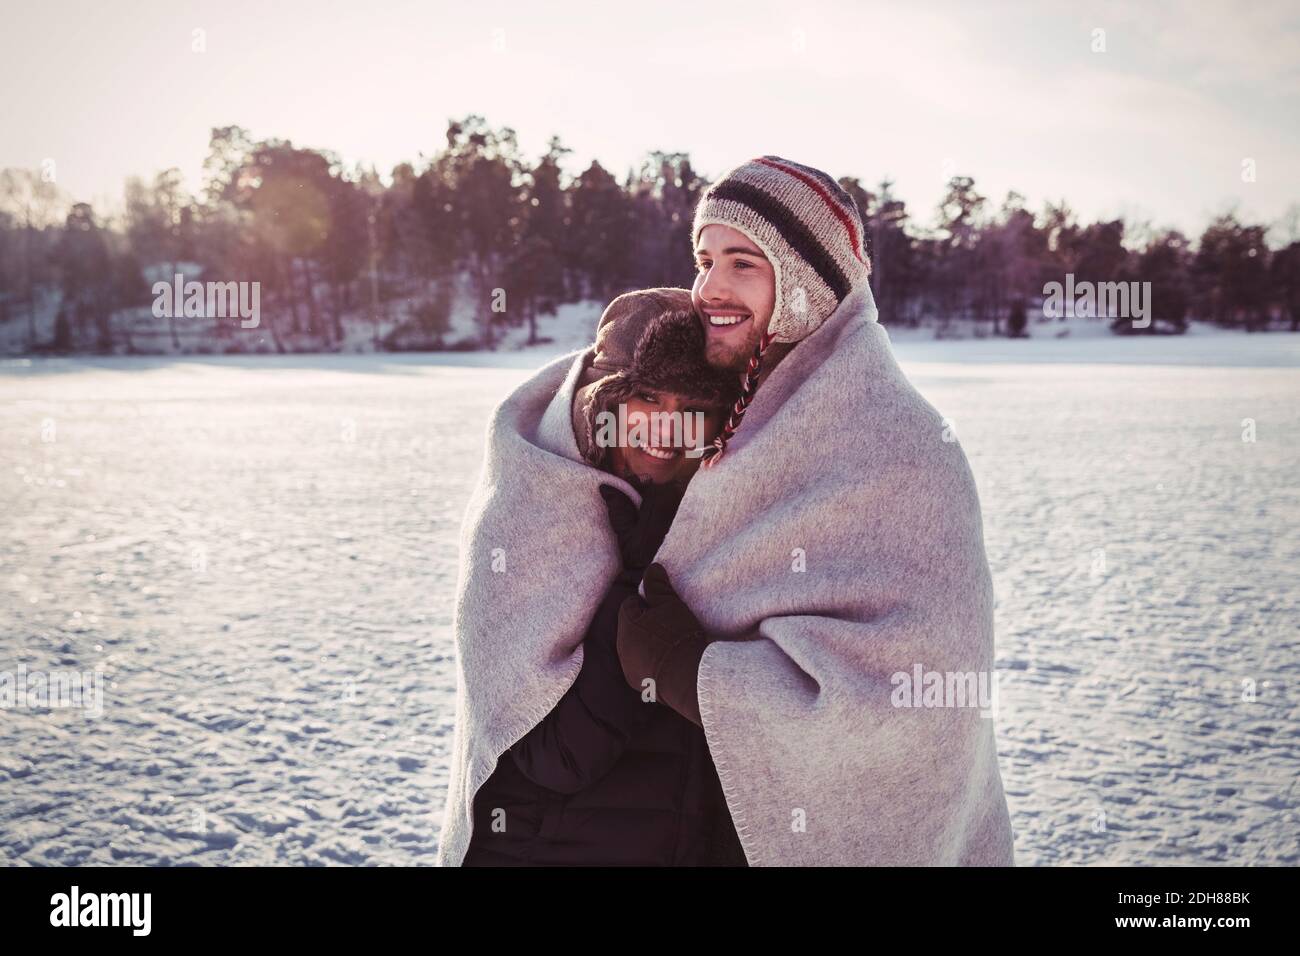 Smiling couple wrapped in blanket while standing on field during winter Stock Photo